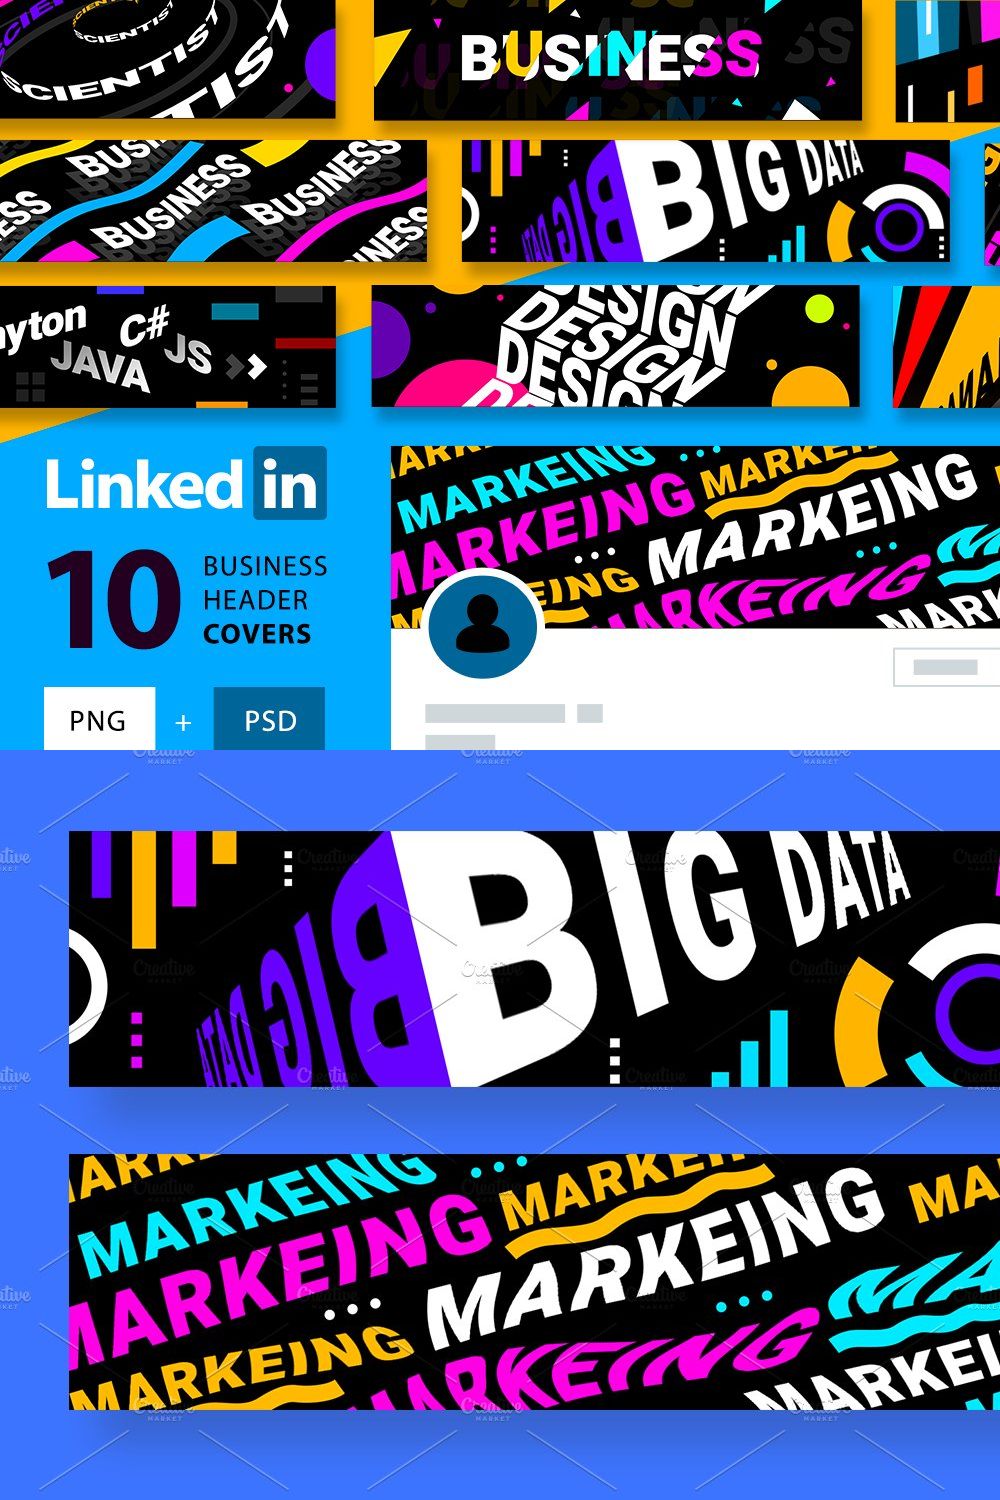 LinkedIn | editable covers pinterest preview image.